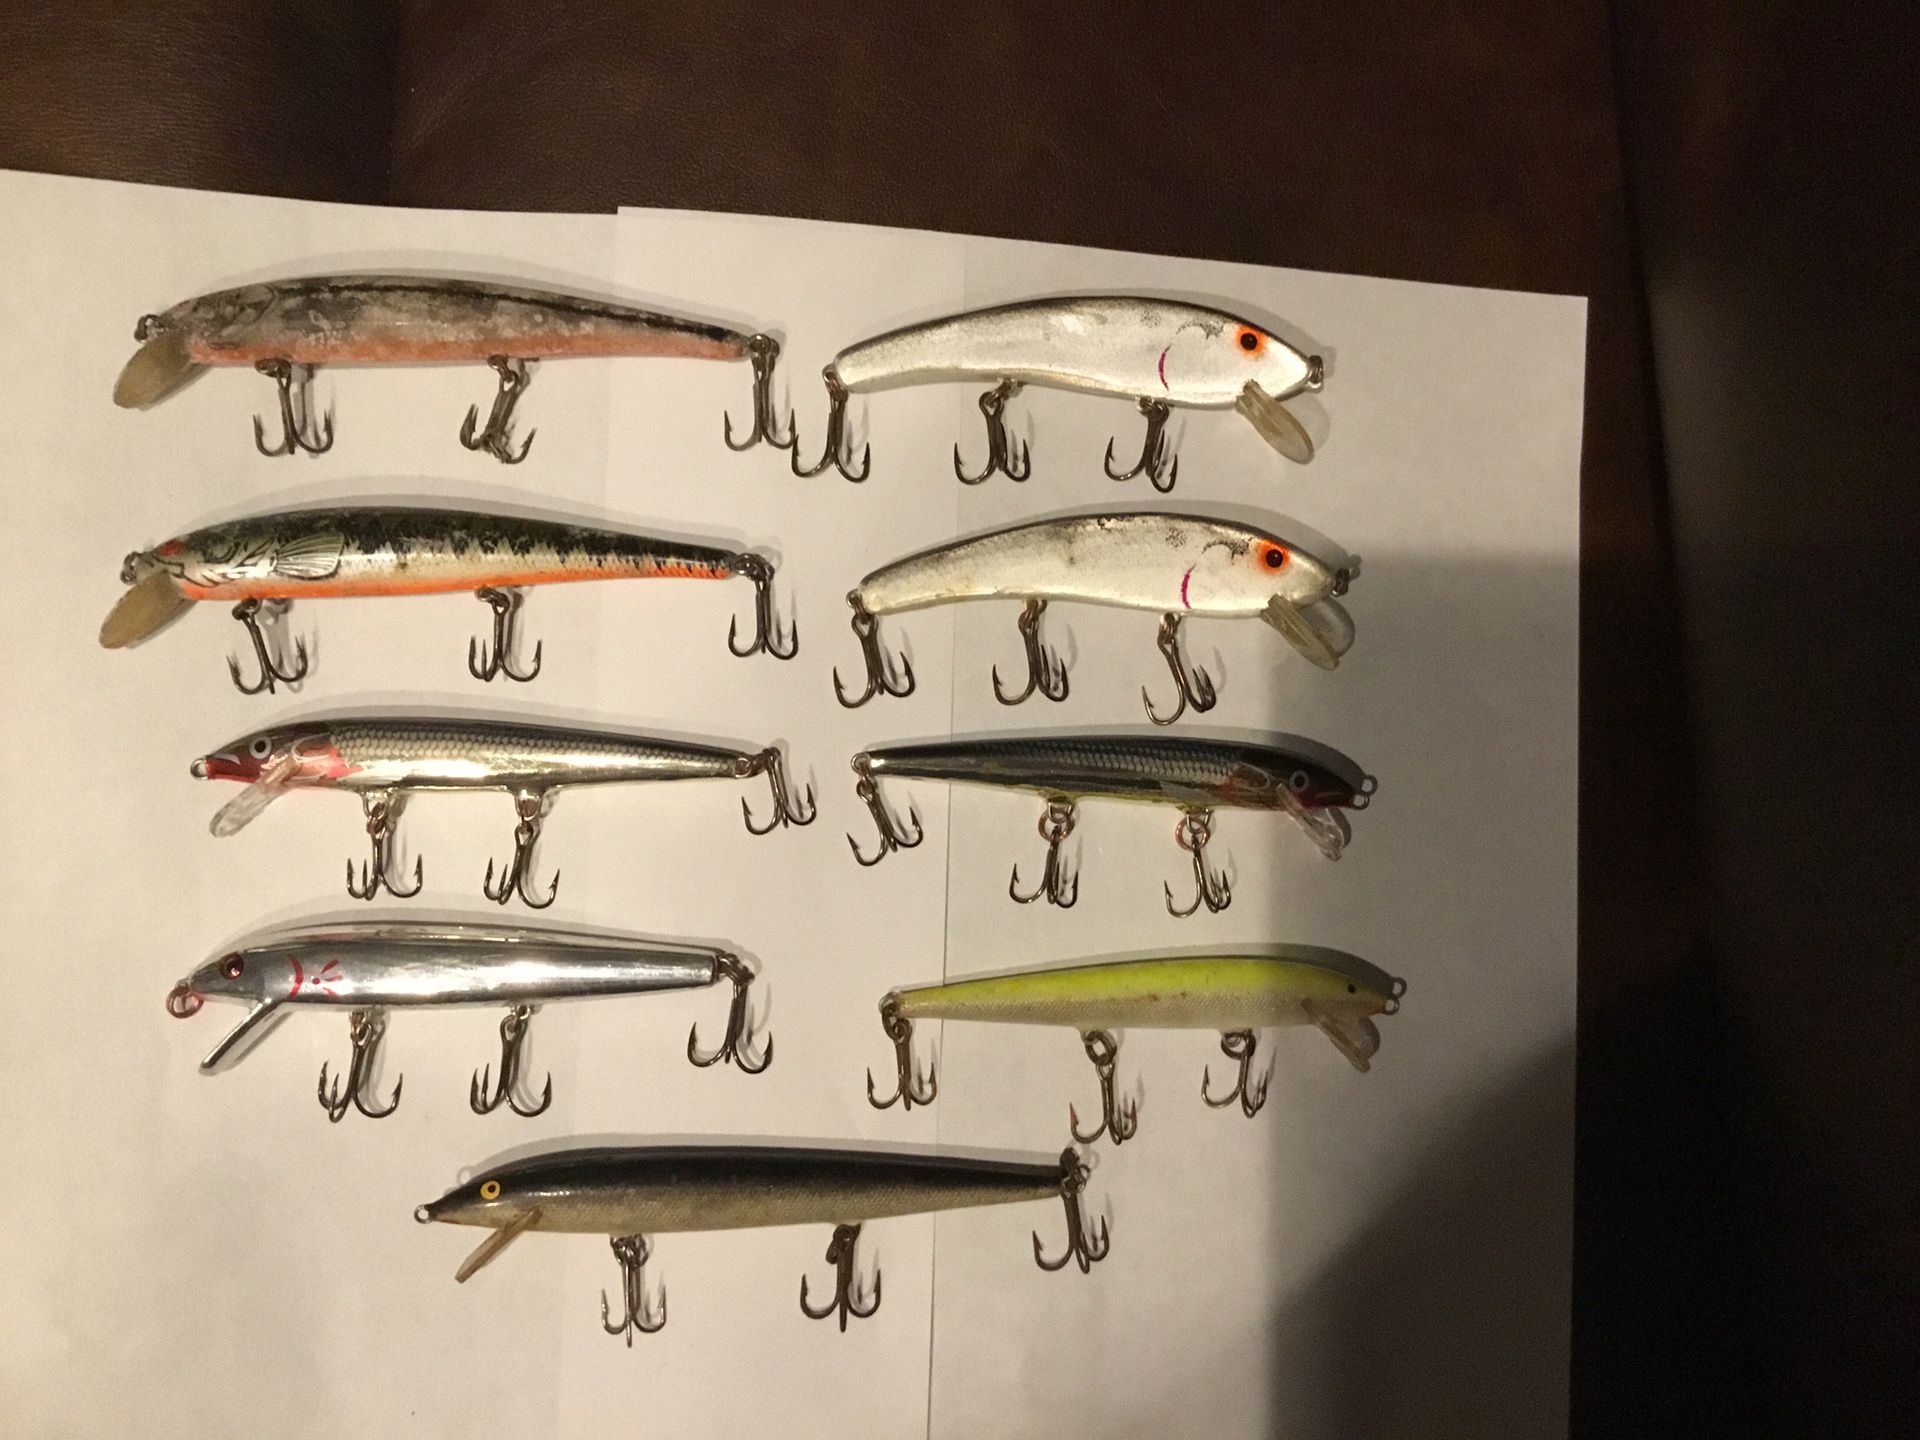 9 crainkbait walleye fishing lures ranging in size from 4 .1/4 to 3. 1/2